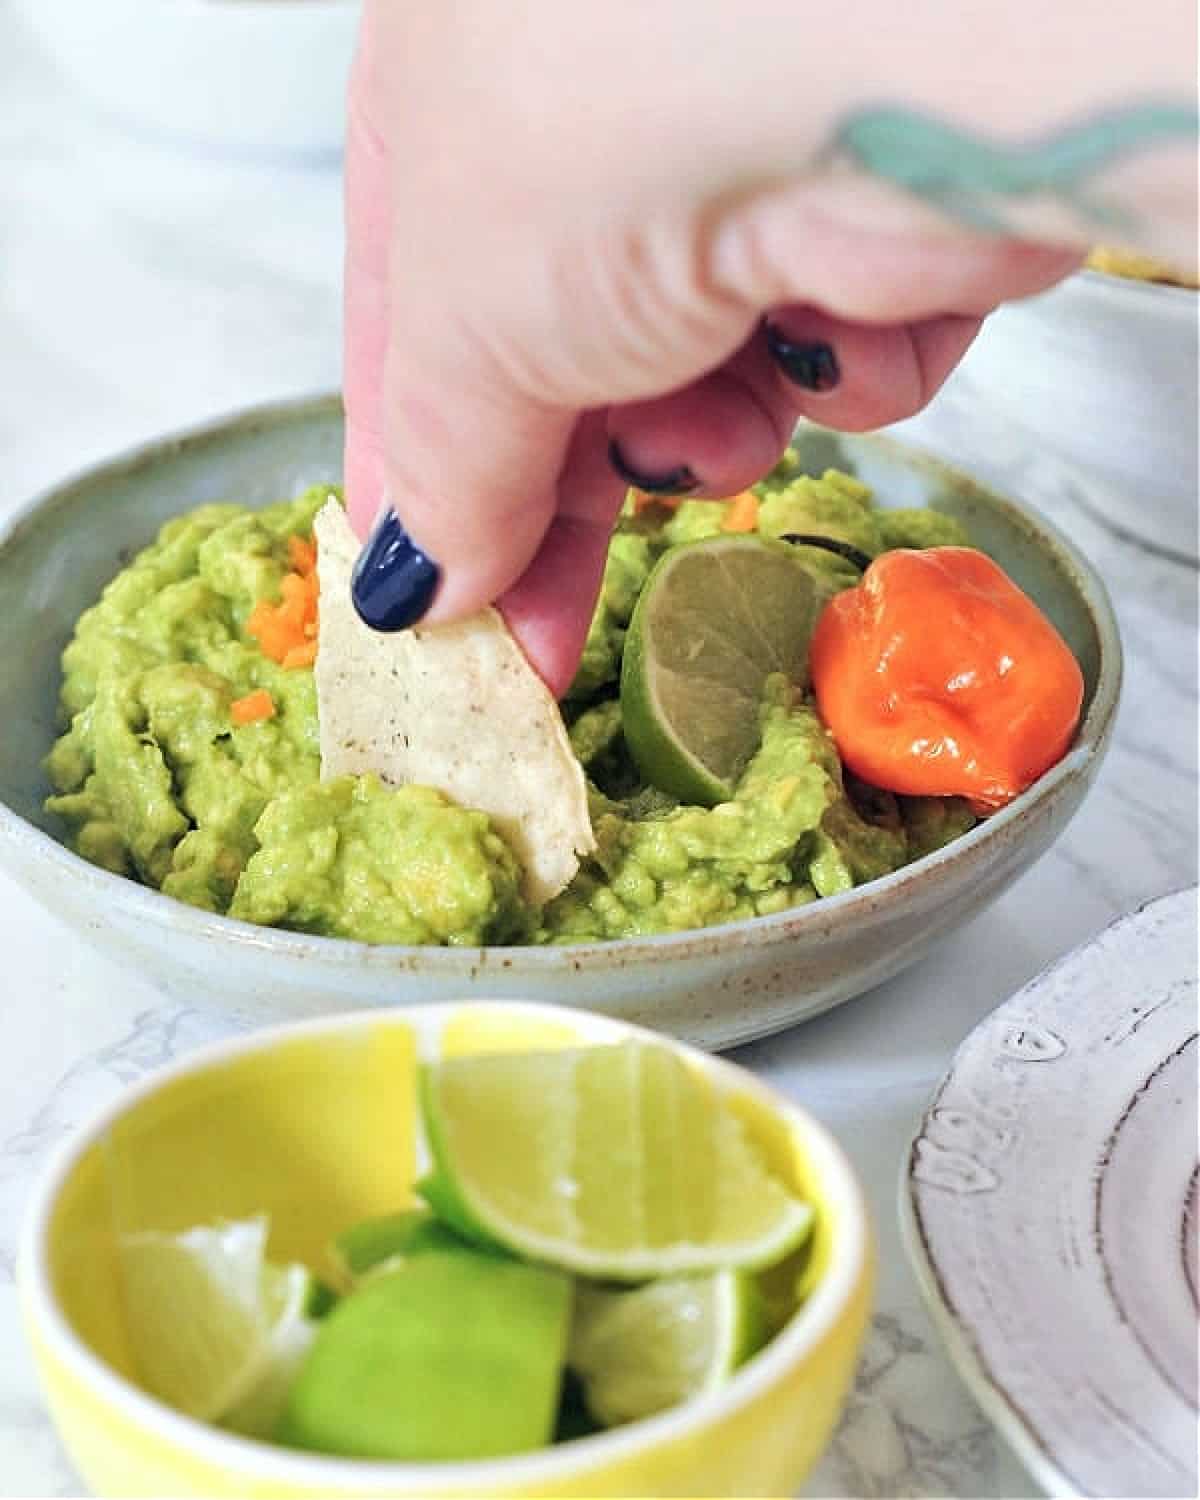 A hand dipping a chip into a bowl of mango habanero guacamole. A smaller bowl of lime wedges on the side.